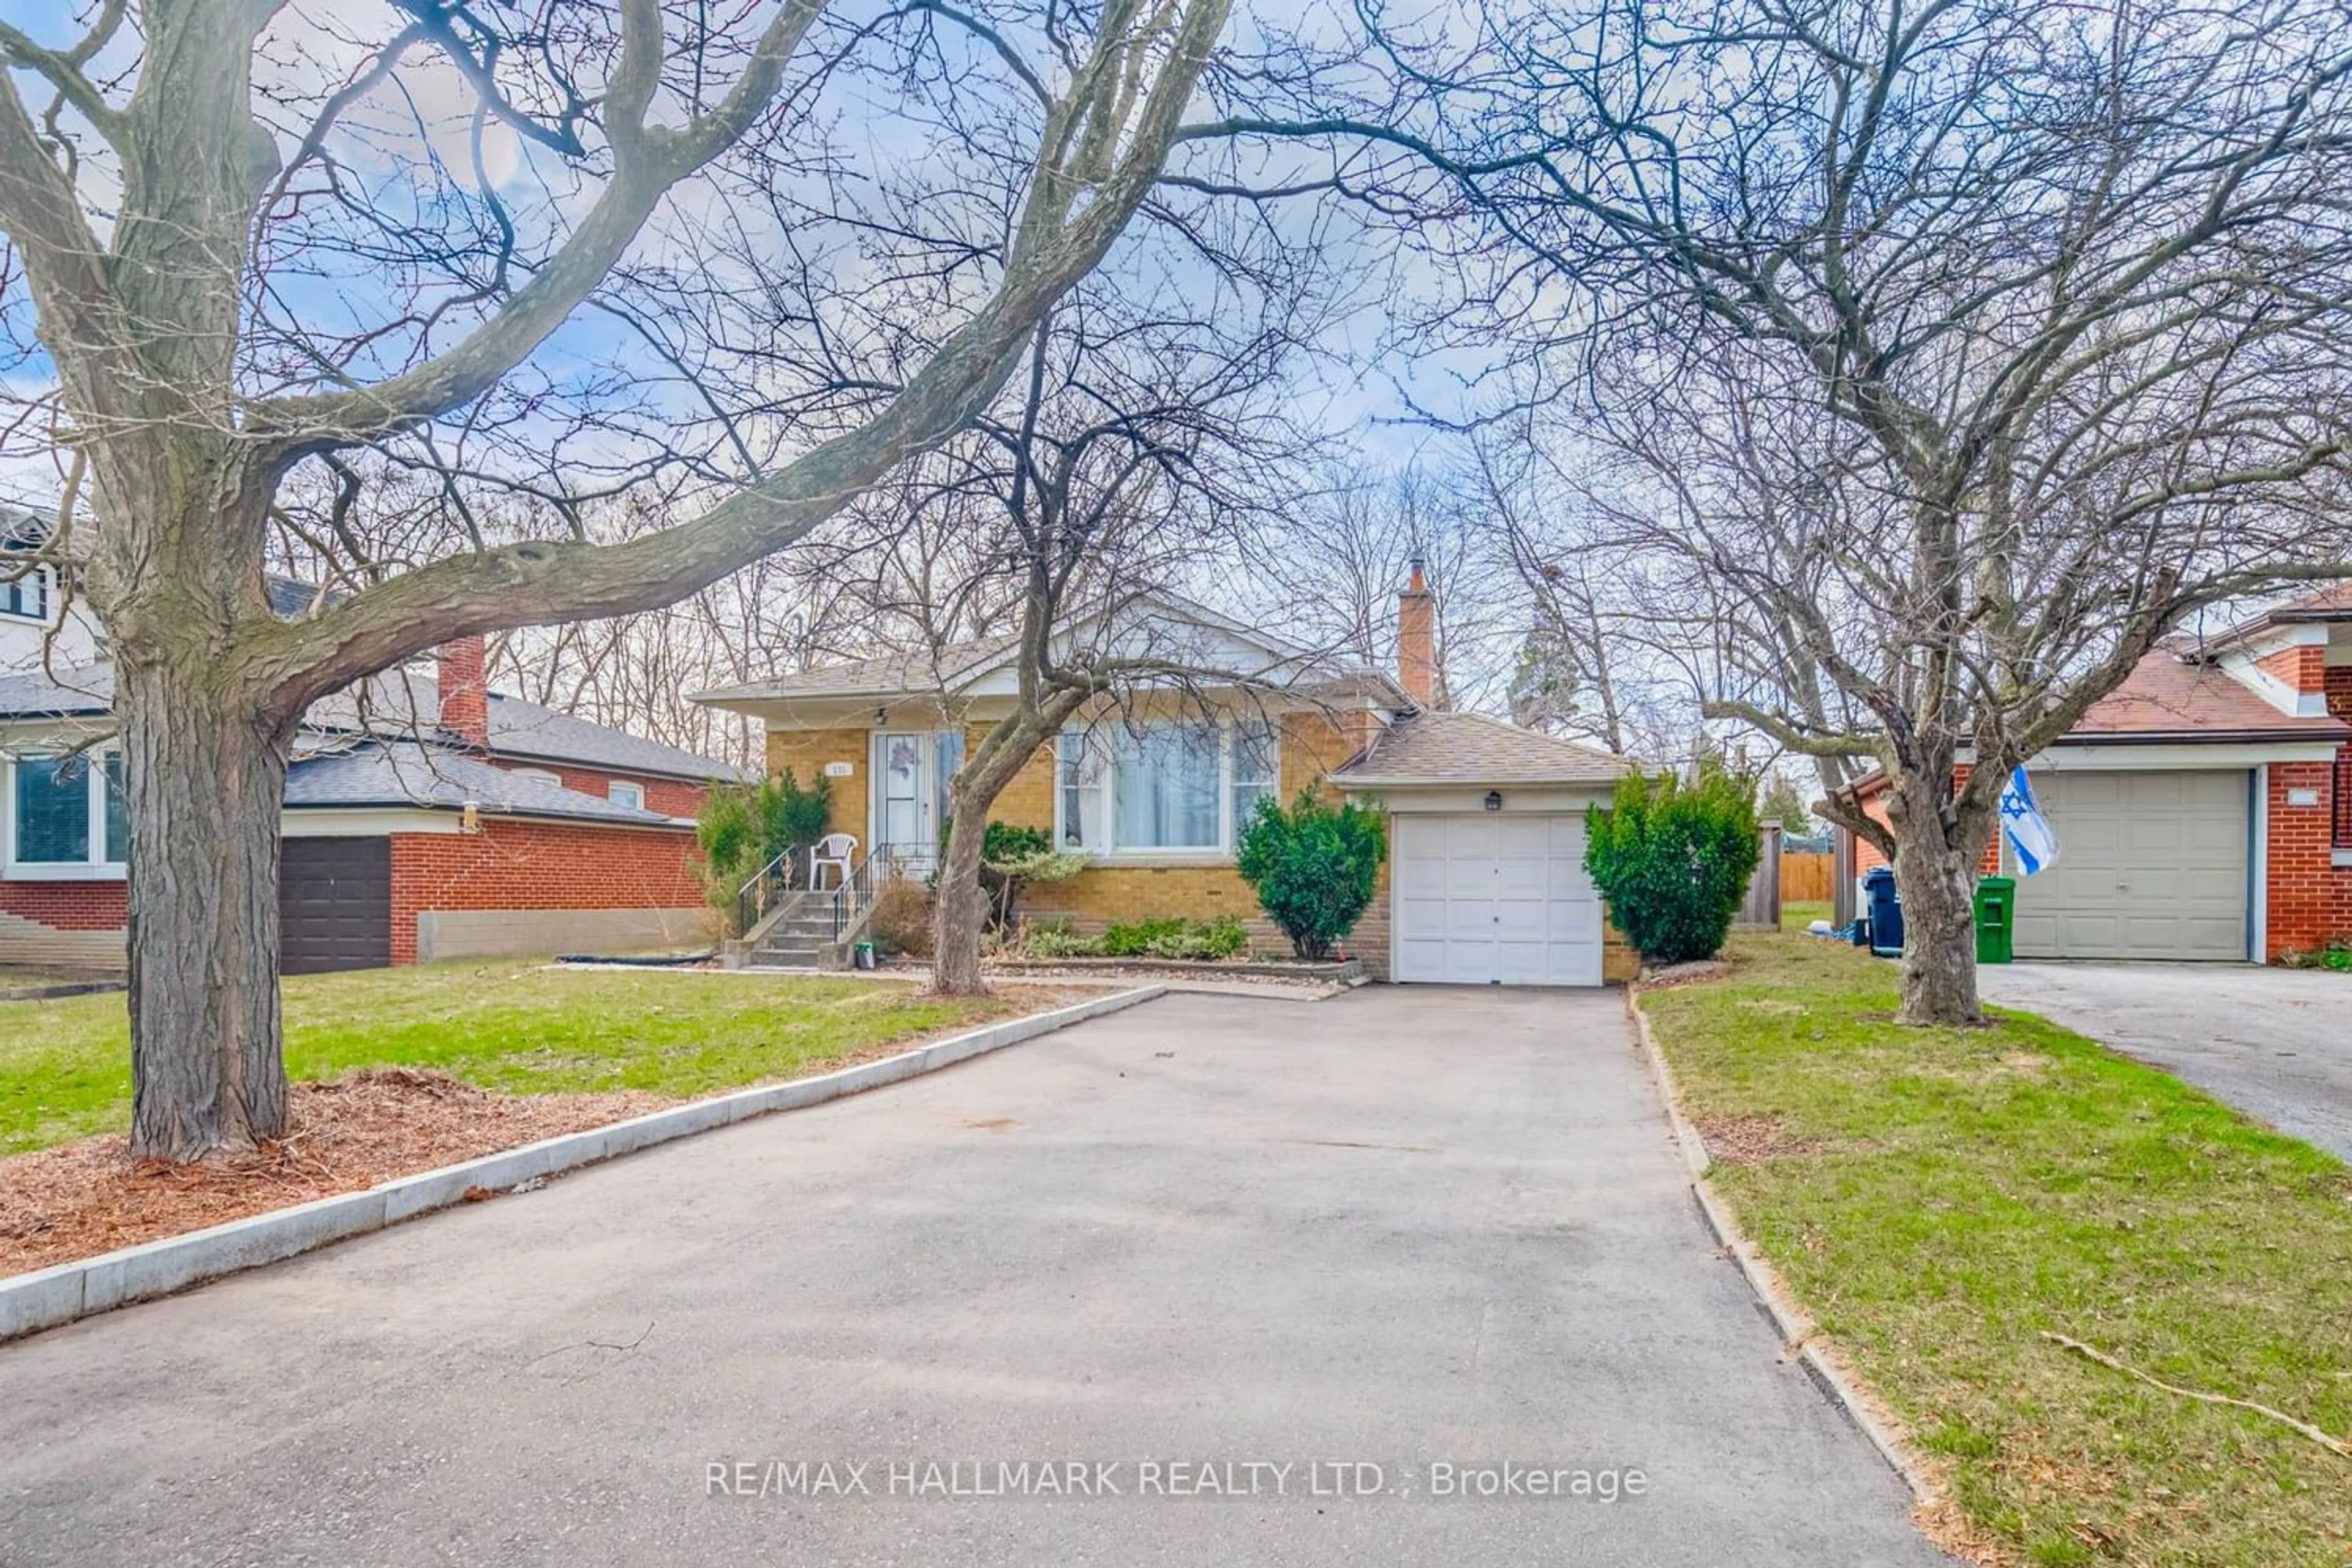 Street view for 131 Searle Ave, Toronto Ontario M3H 4B1